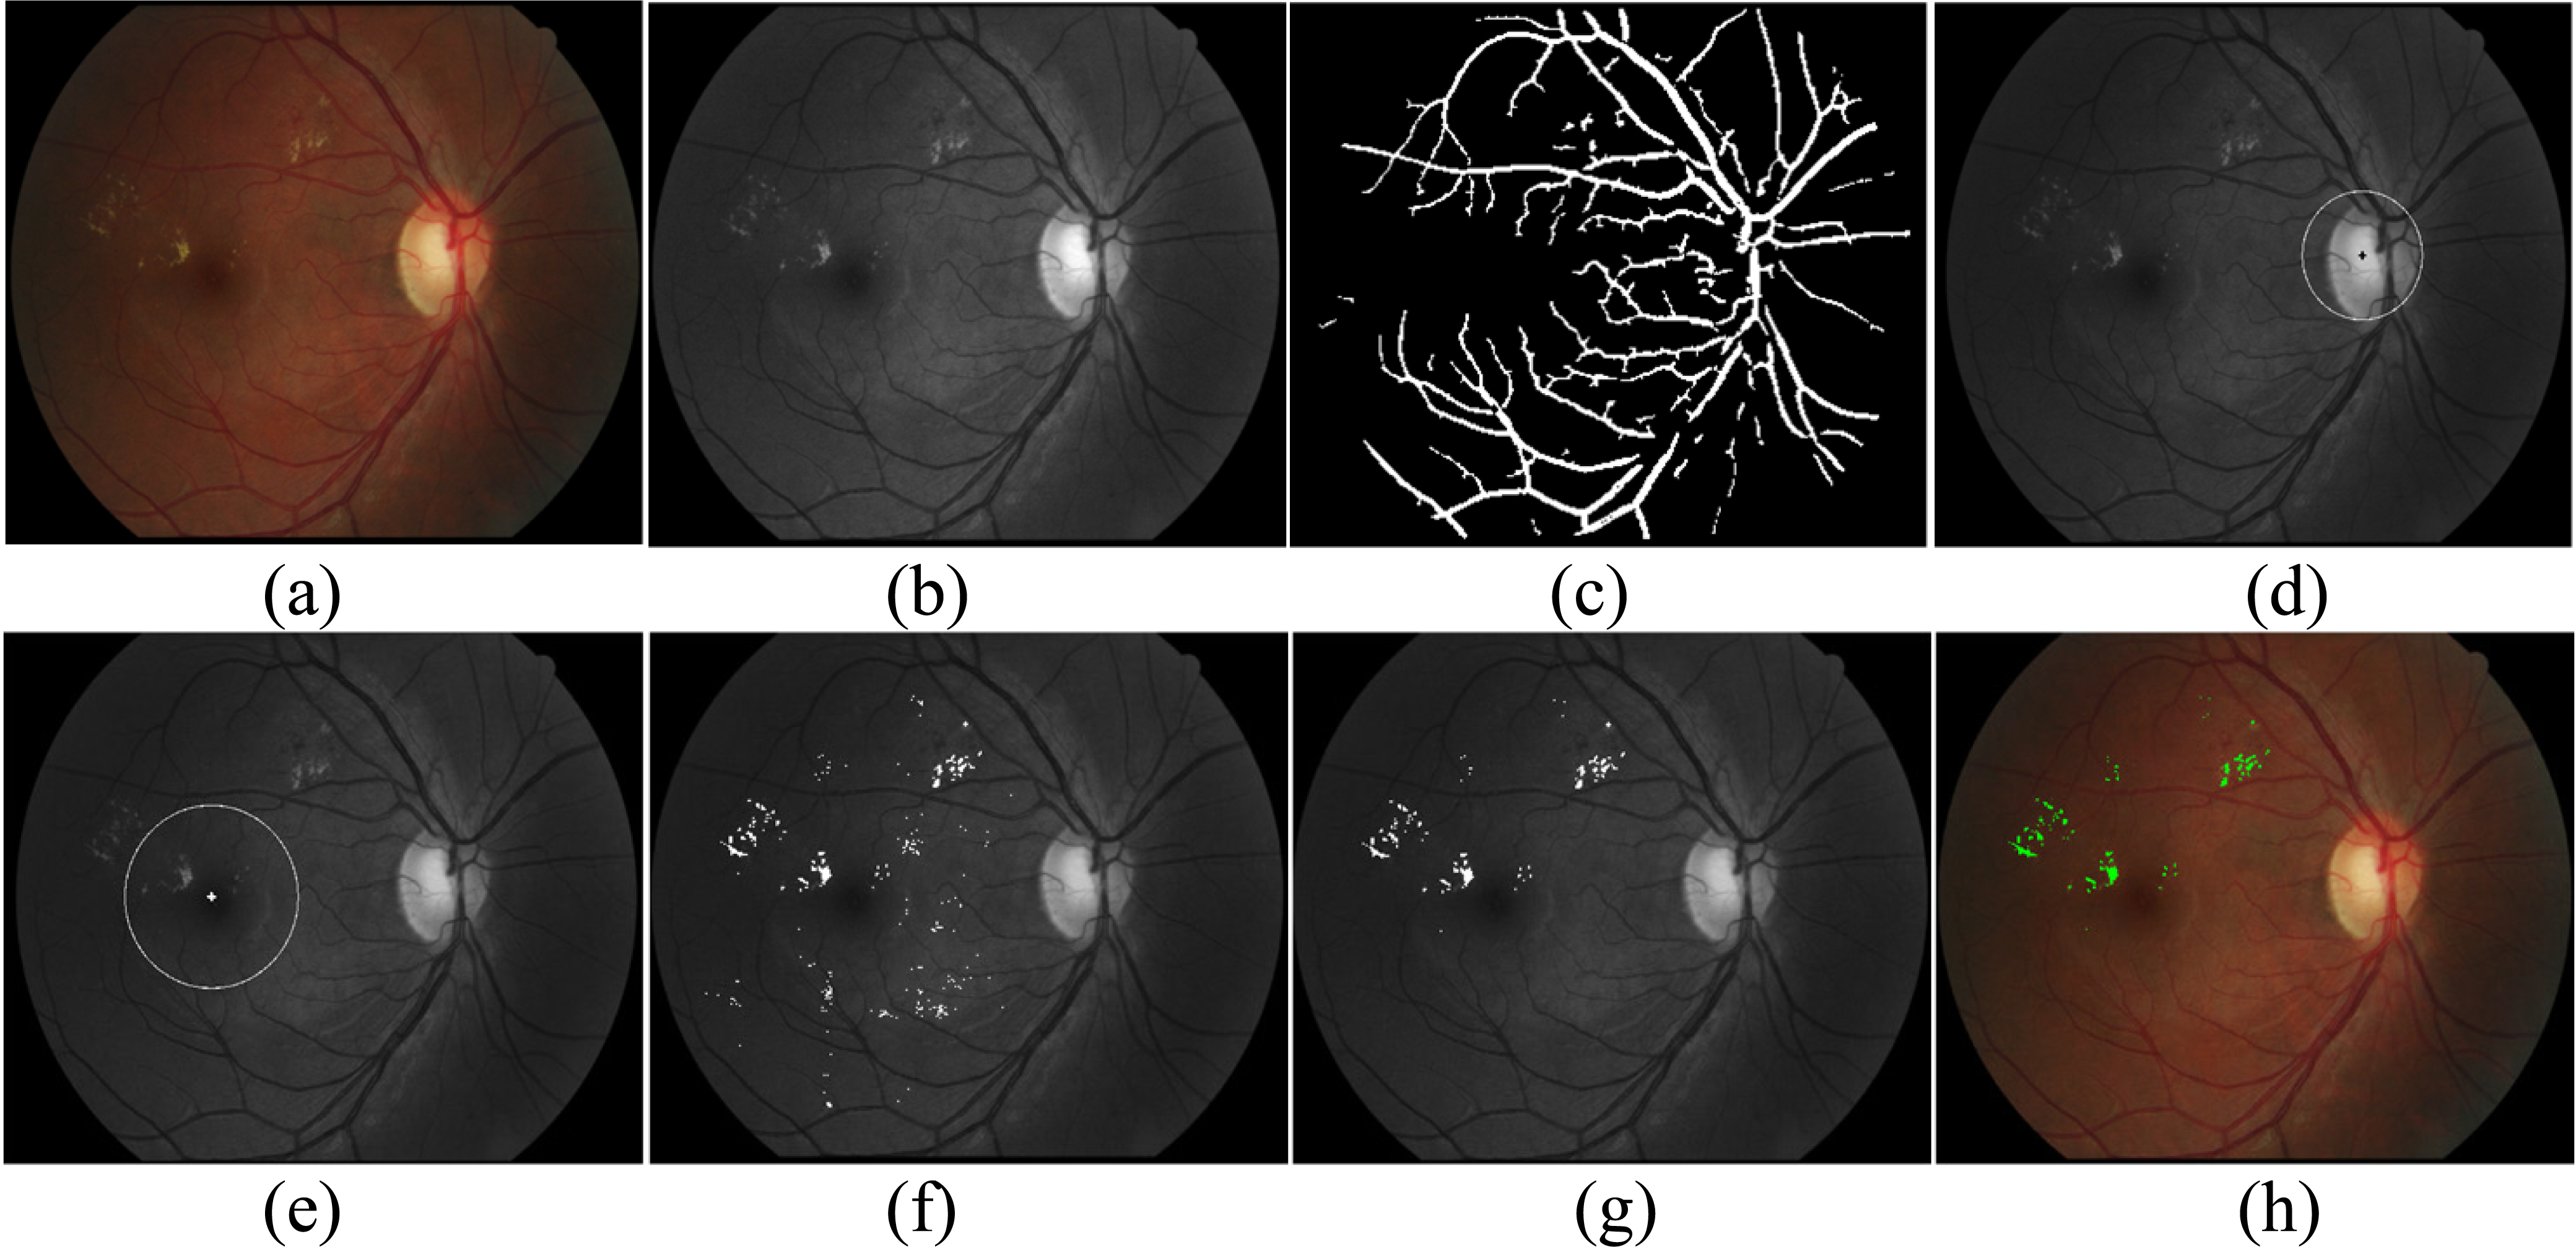 An example of the proposed procedure. (a) Original image, (b) the green channel image, (c) outputs of main vessel segmentation, (d) OD localization and defection, (e) macula localization and coordinates, (f) outputs of exudate candidates, (g) outputs of exudate classification, (h) the final outputs of exudate in RGB image.